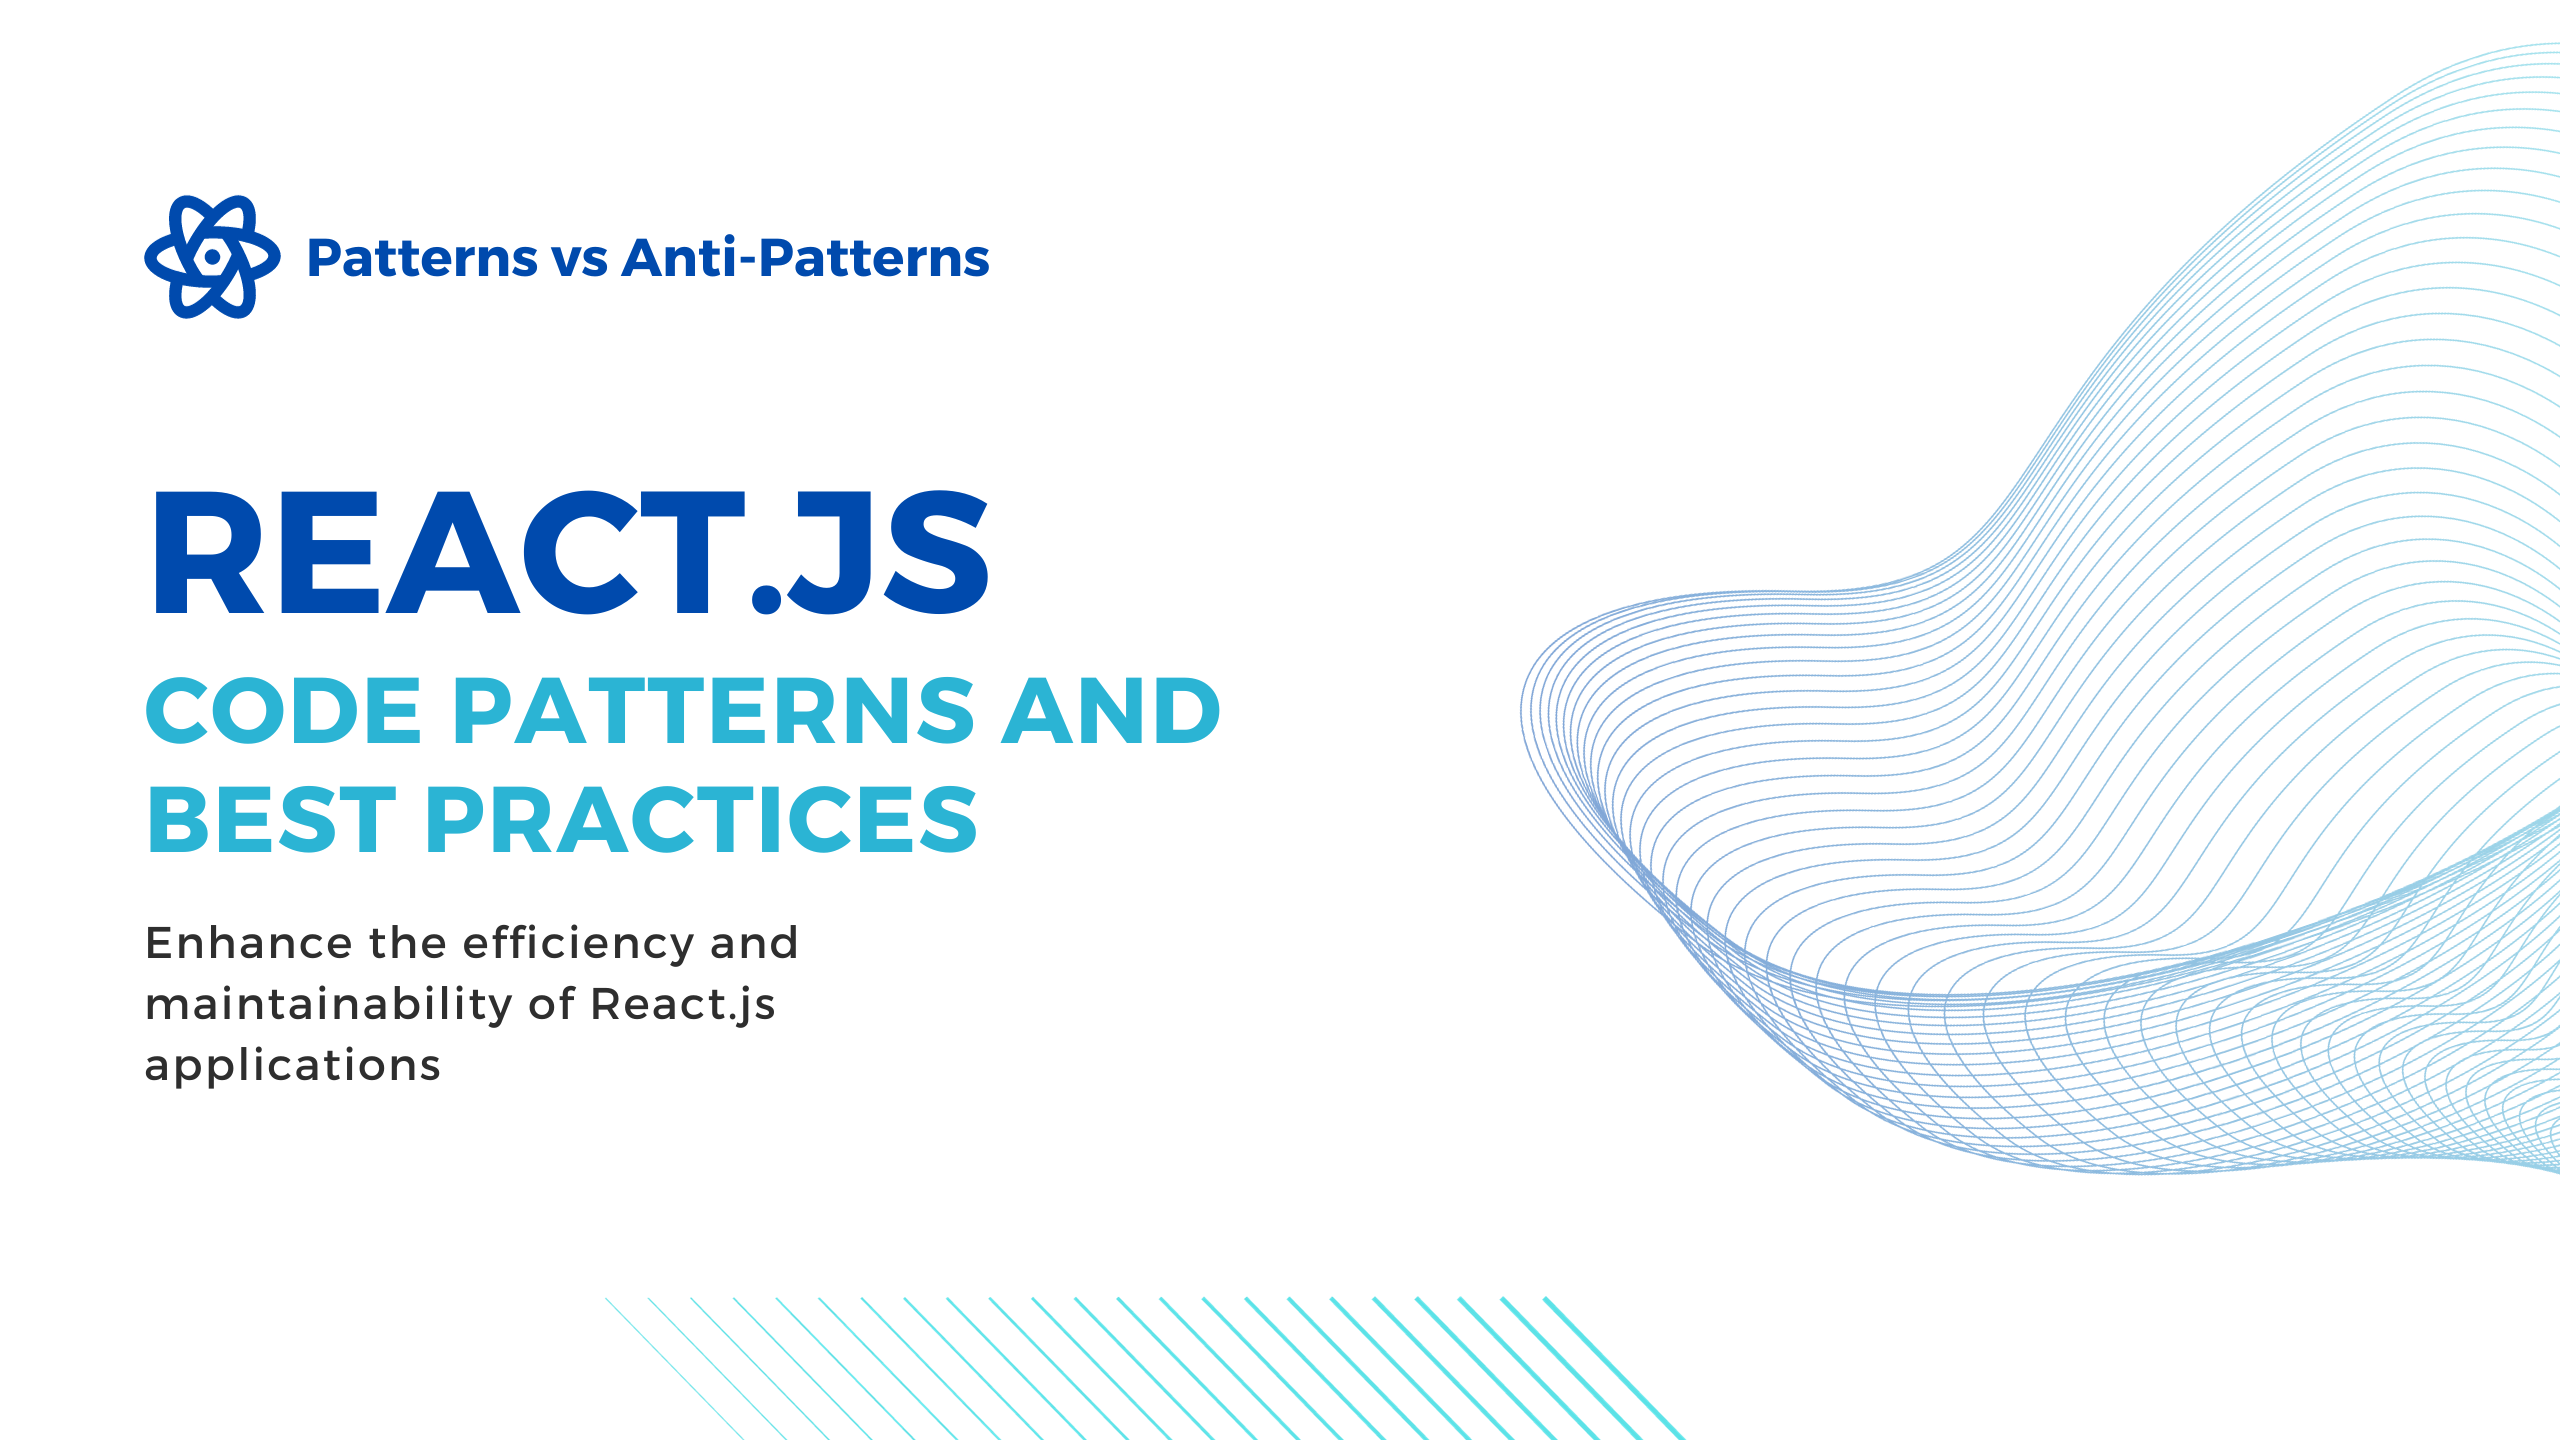 The Ultimate Guide to React.js Code Patterns and Best Practices